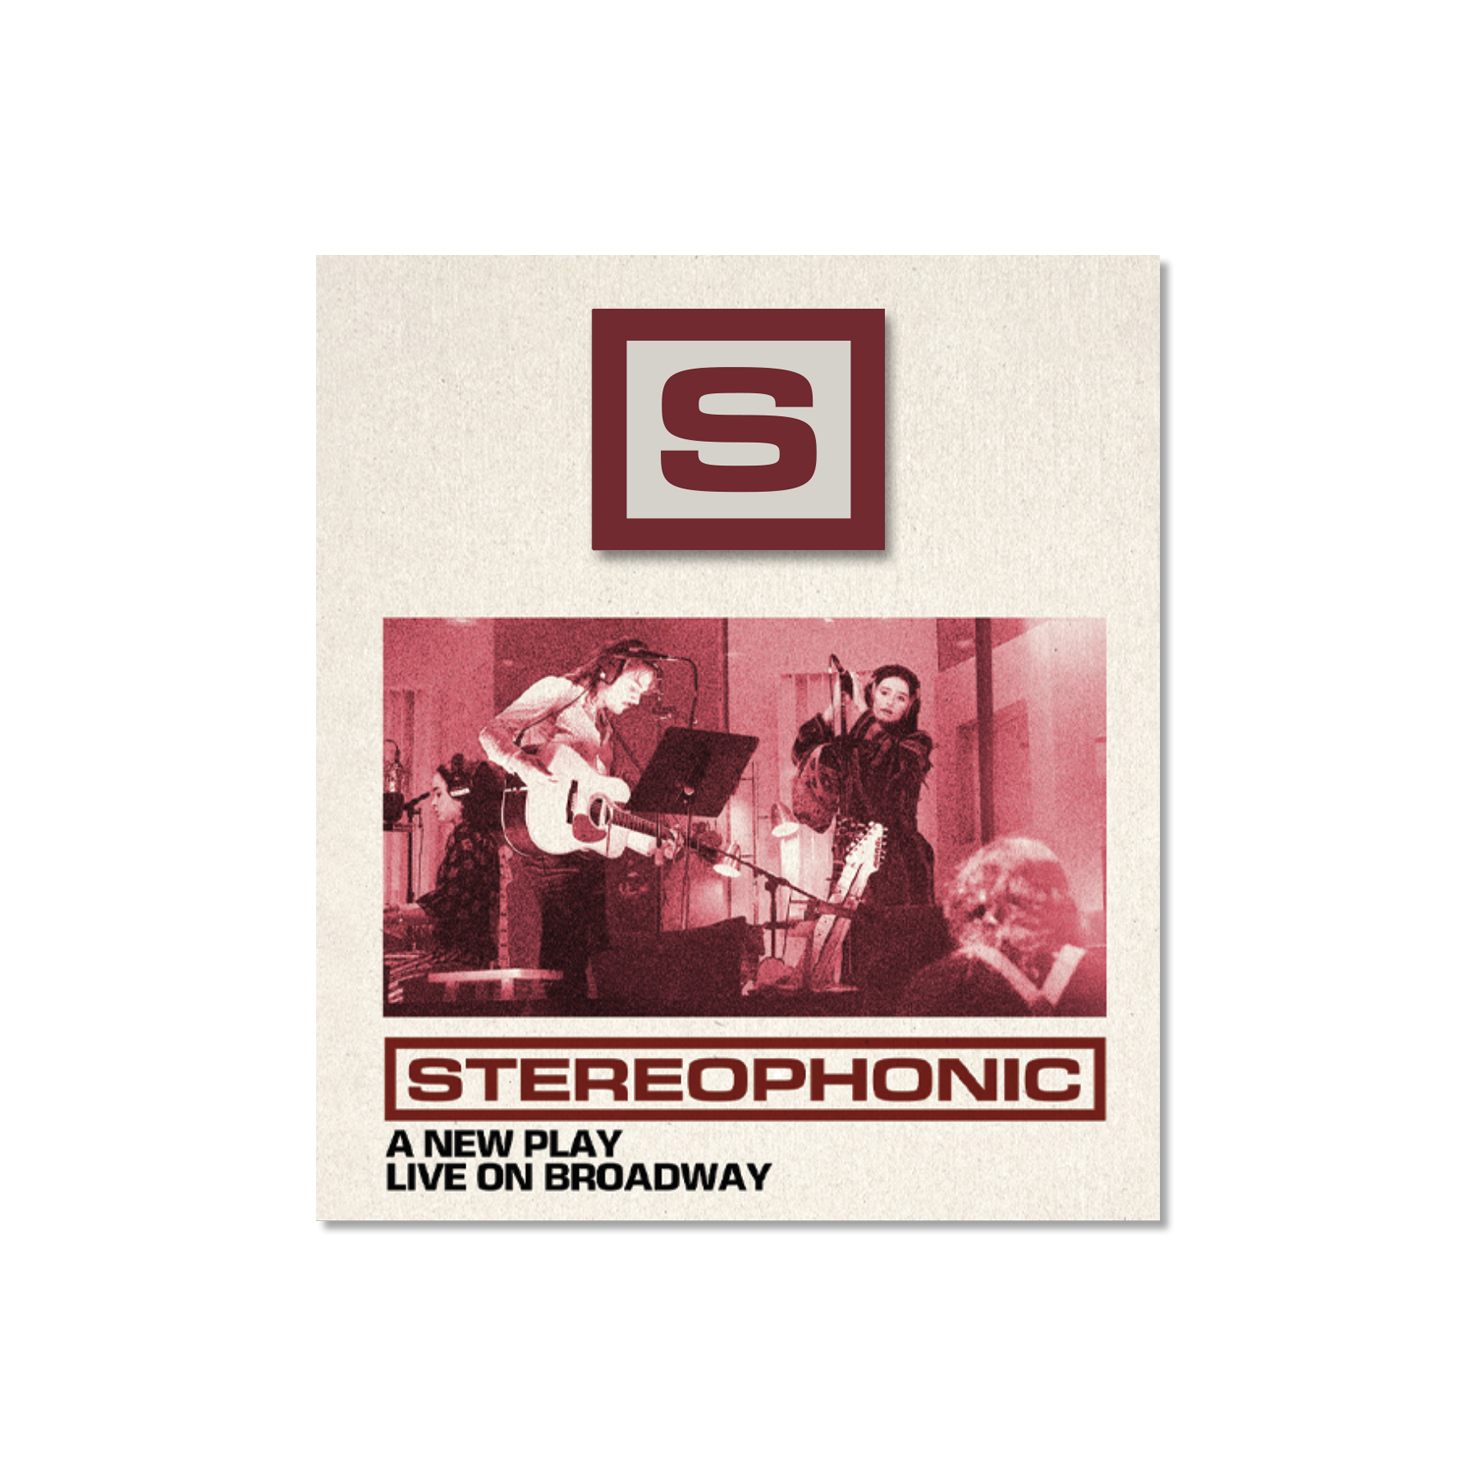 STEREOPHONIC Lapel Pin Image